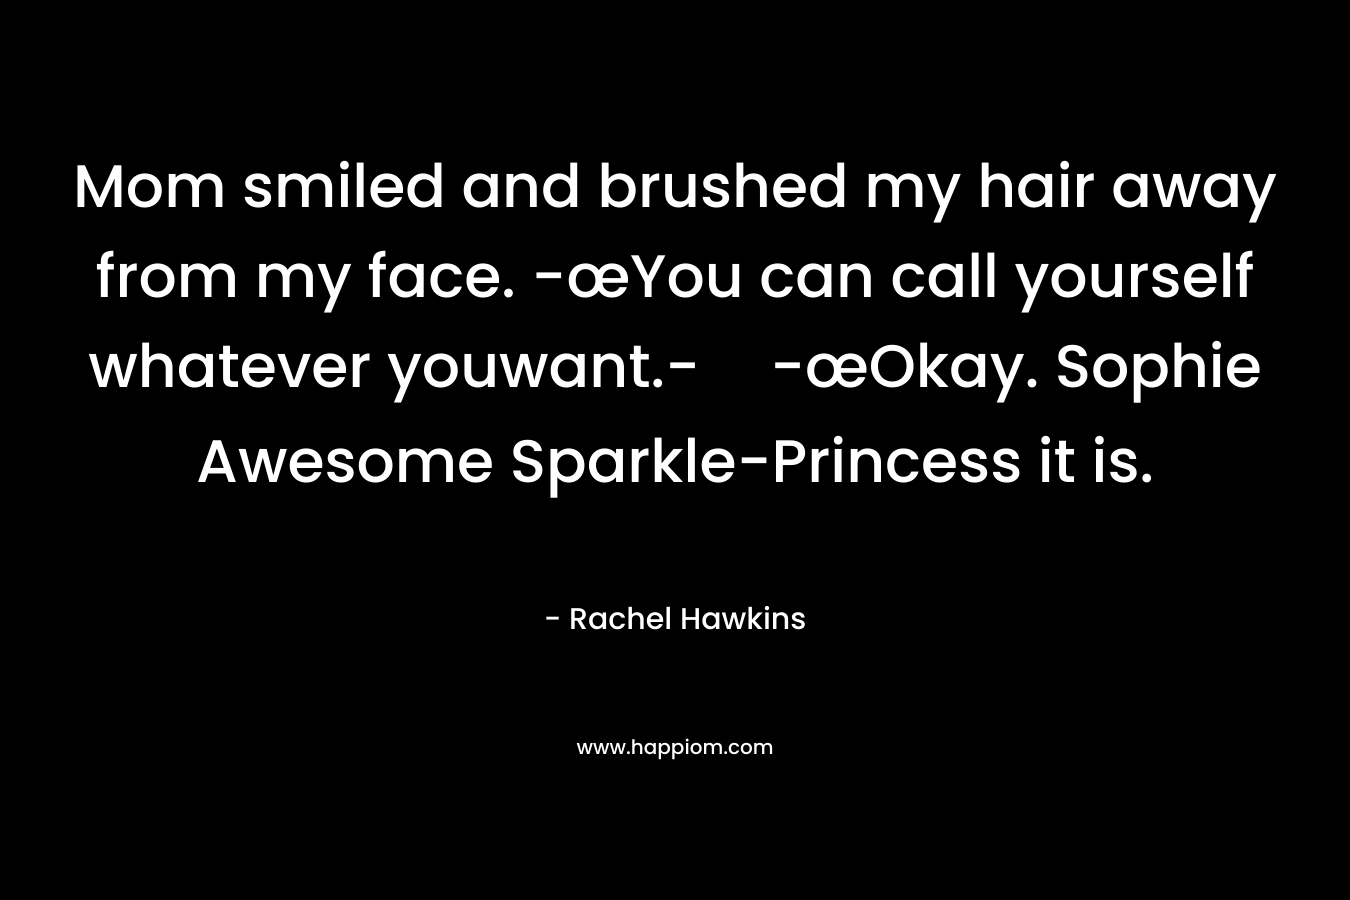 Mom smiled and brushed my hair away from my face. -œYou can call yourself whatever youwant.--œOkay. Sophie Awesome Sparkle-Princess it is. – Rachel Hawkins